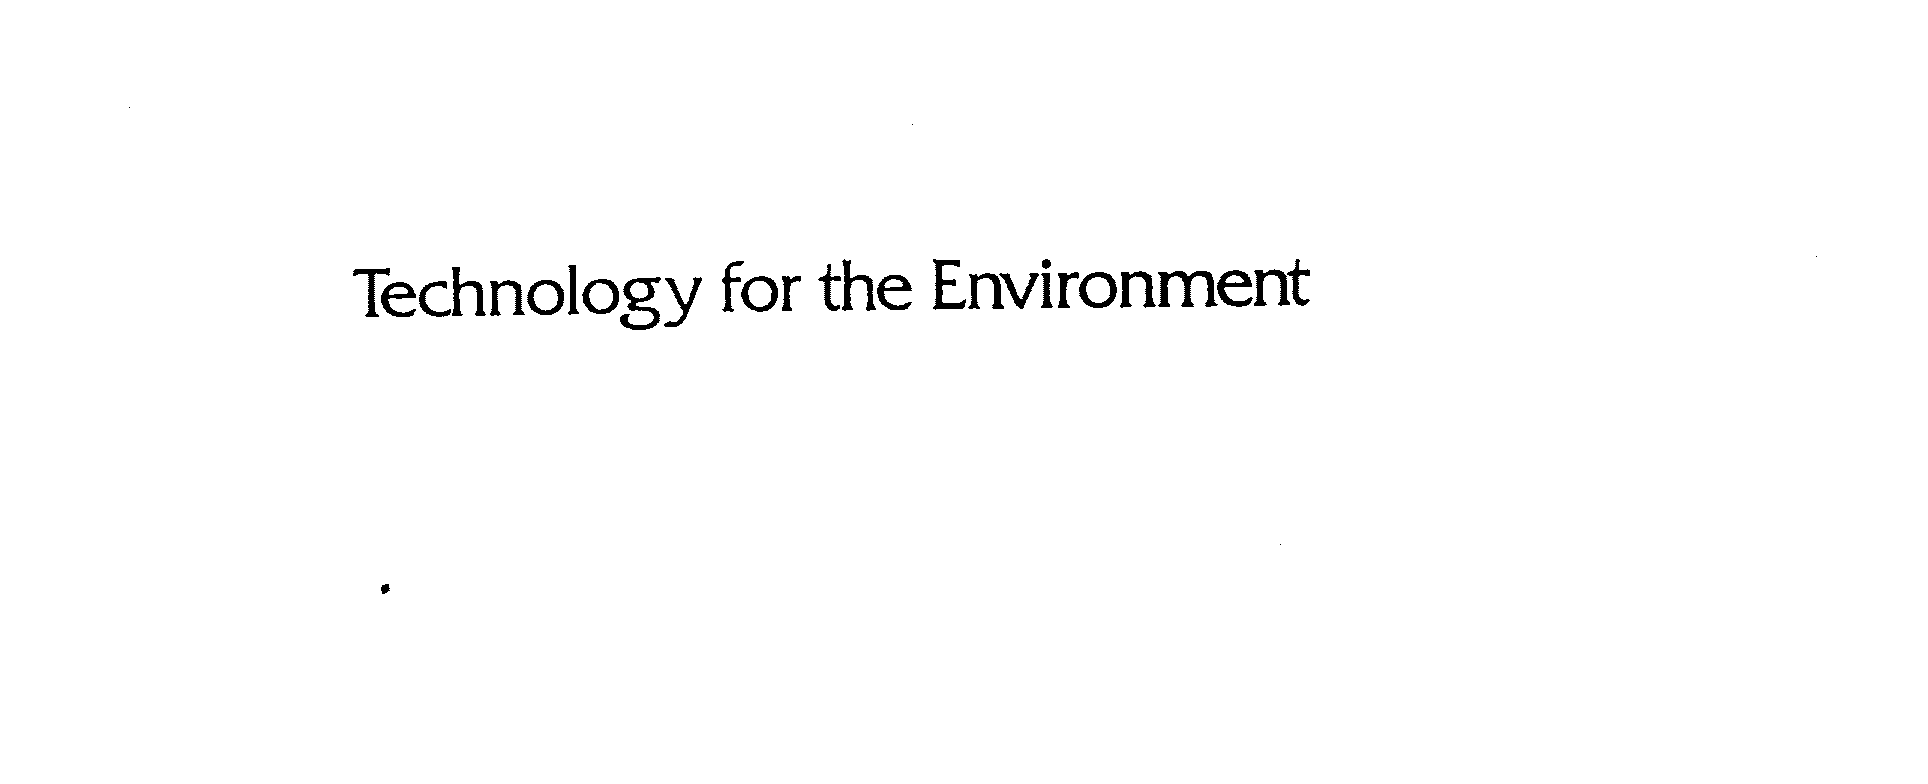  TECHNOLOGY FOR THE ENVIRONMENT